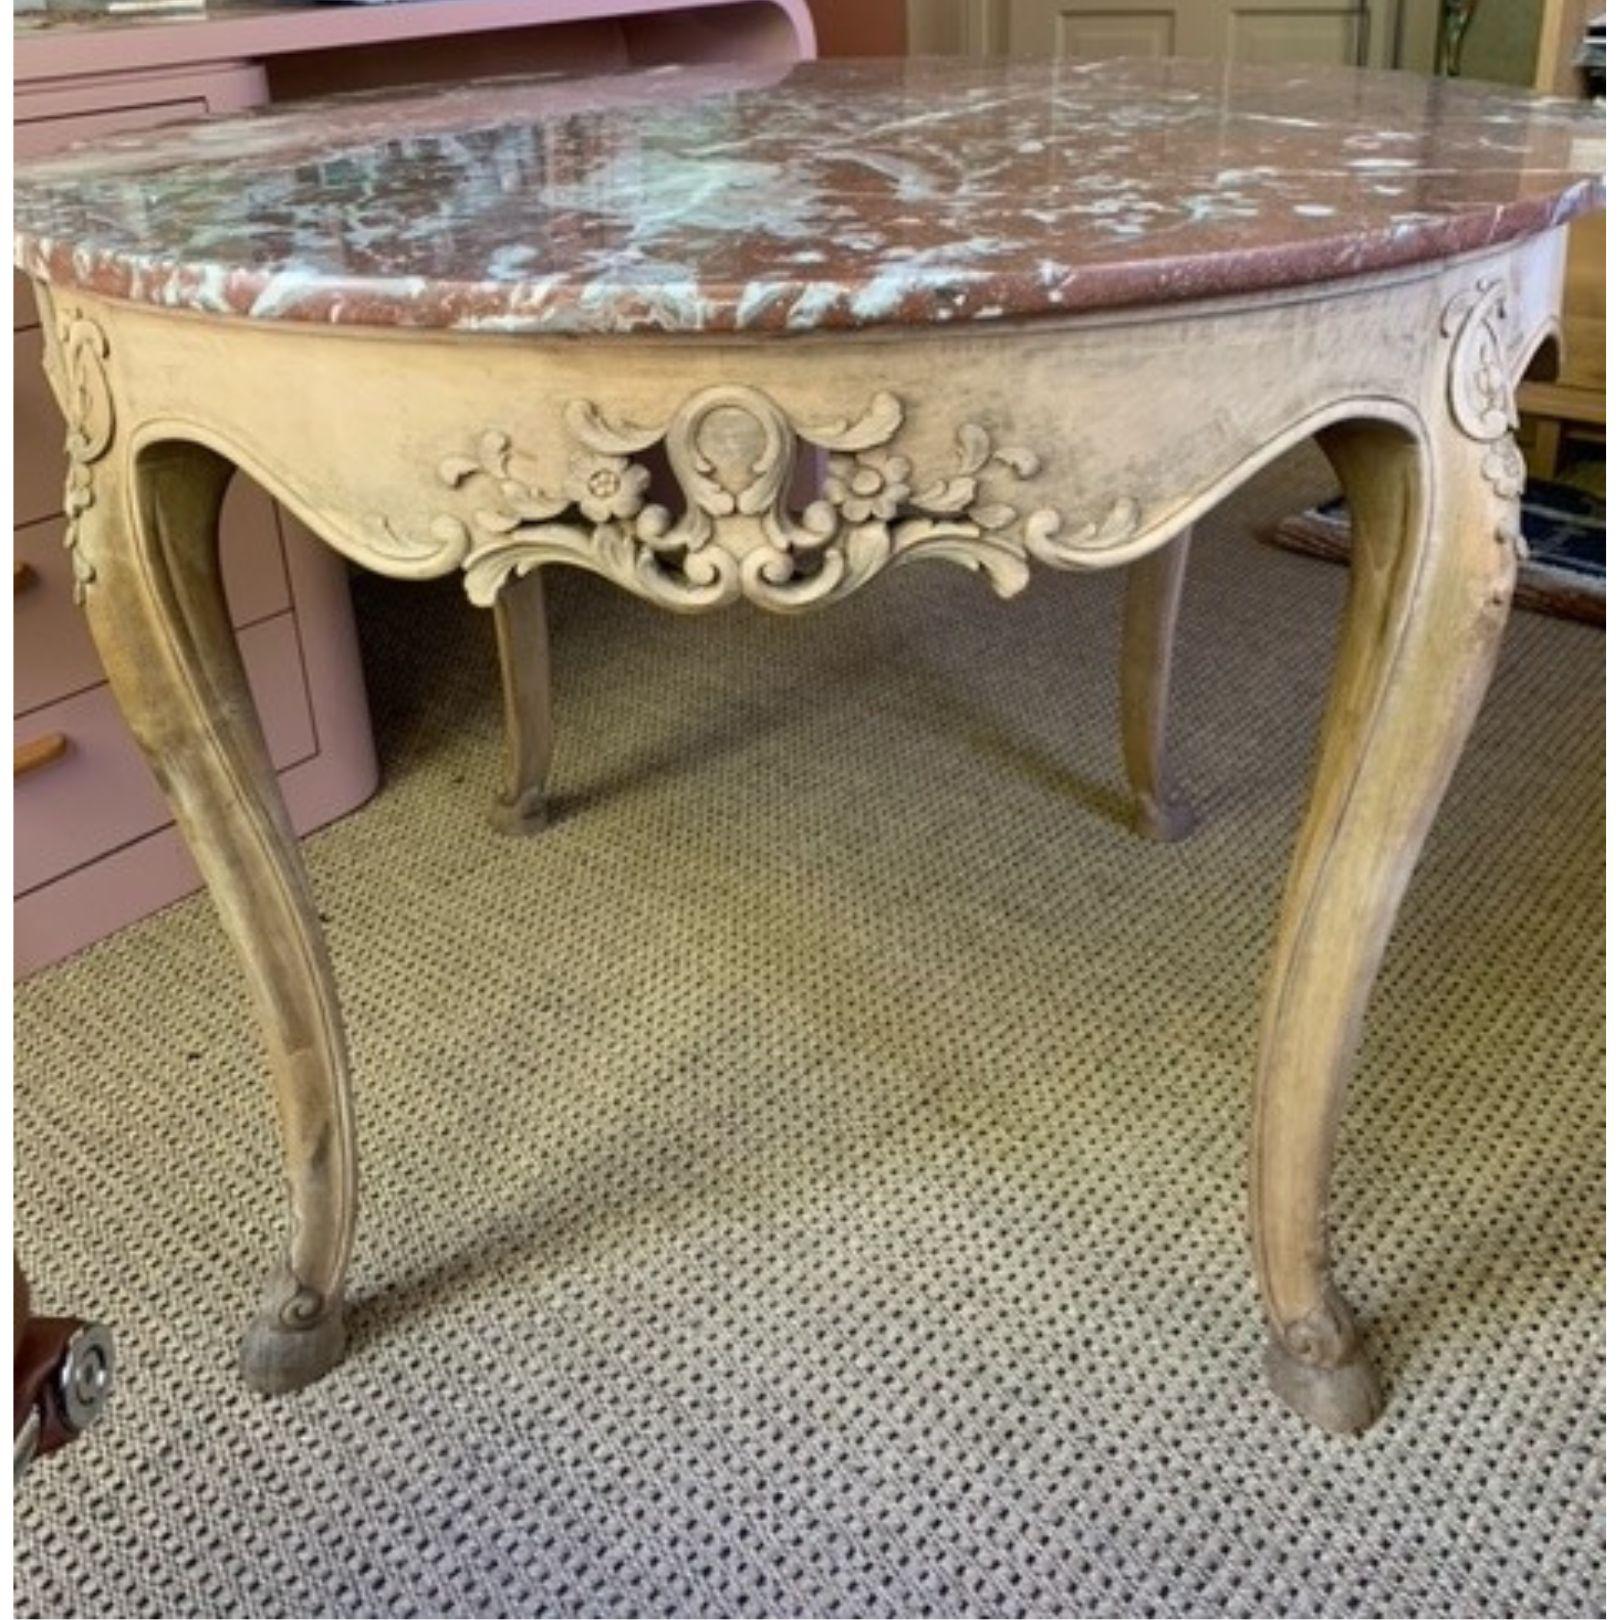 Early 20th Century French Louis XV Pink Marble Top Bleached Wood Table In Good Condition For Sale In Austin, TX